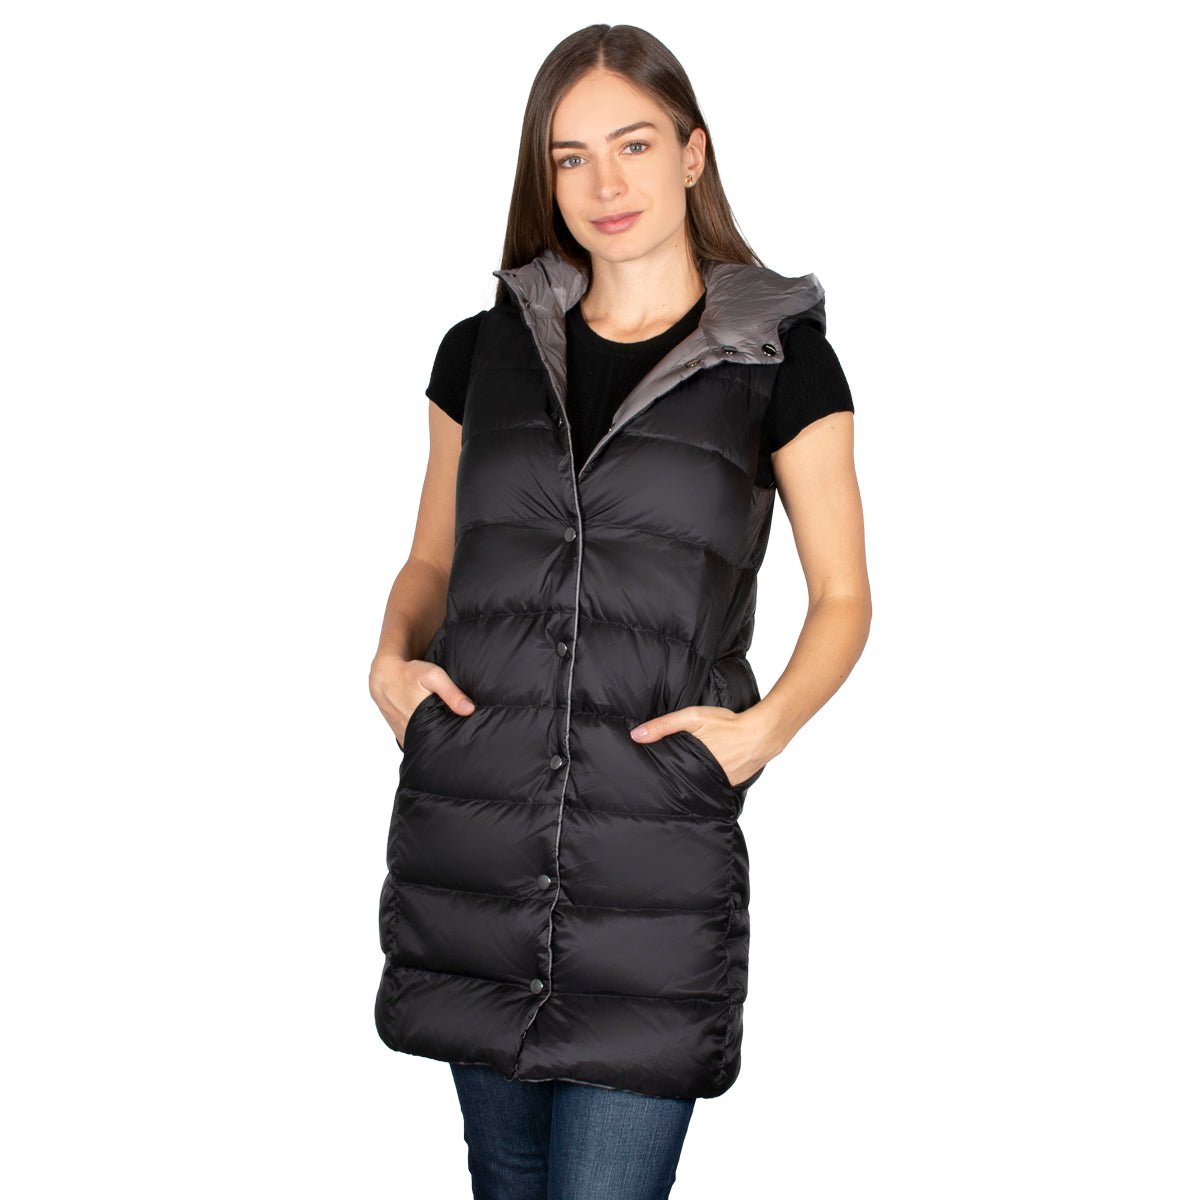 Ripley - CHALECO LARGO INDEX PARA MUJER CAPUCHA DEQUILT